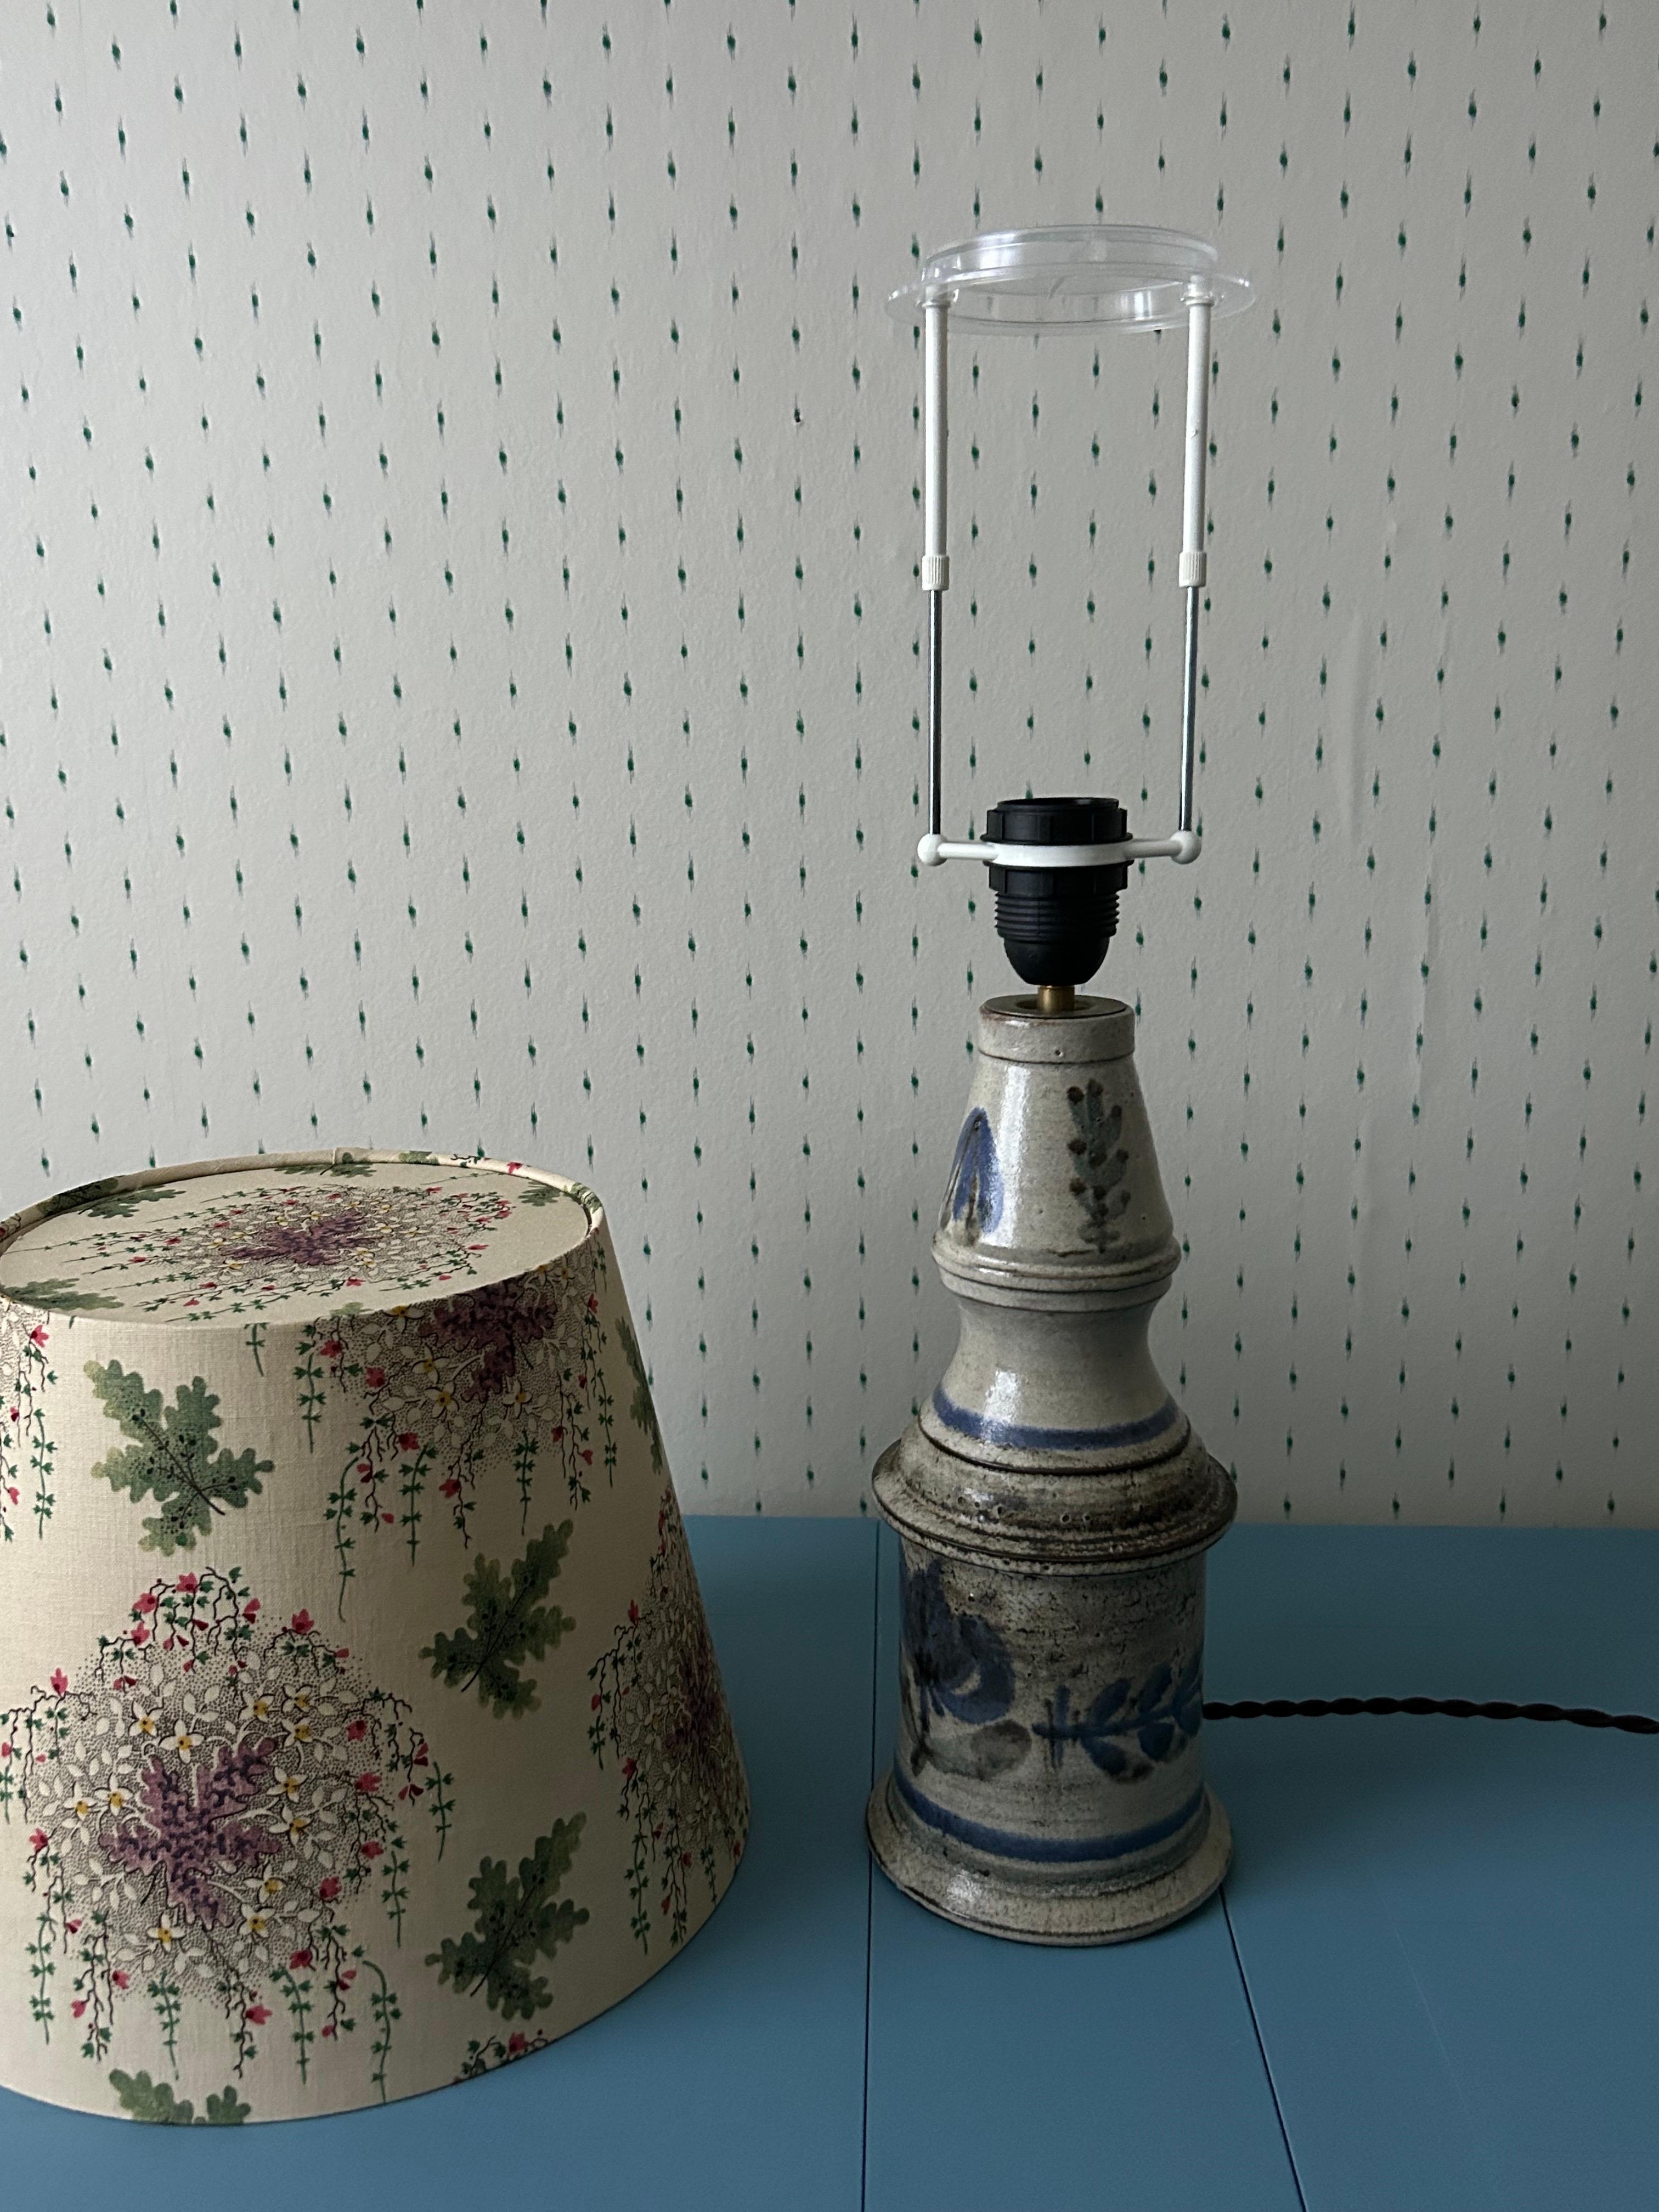 Vintage Gustave Reynaud Ceramic Table Lamp with Customized Shade, France, 1950s For Sale 2